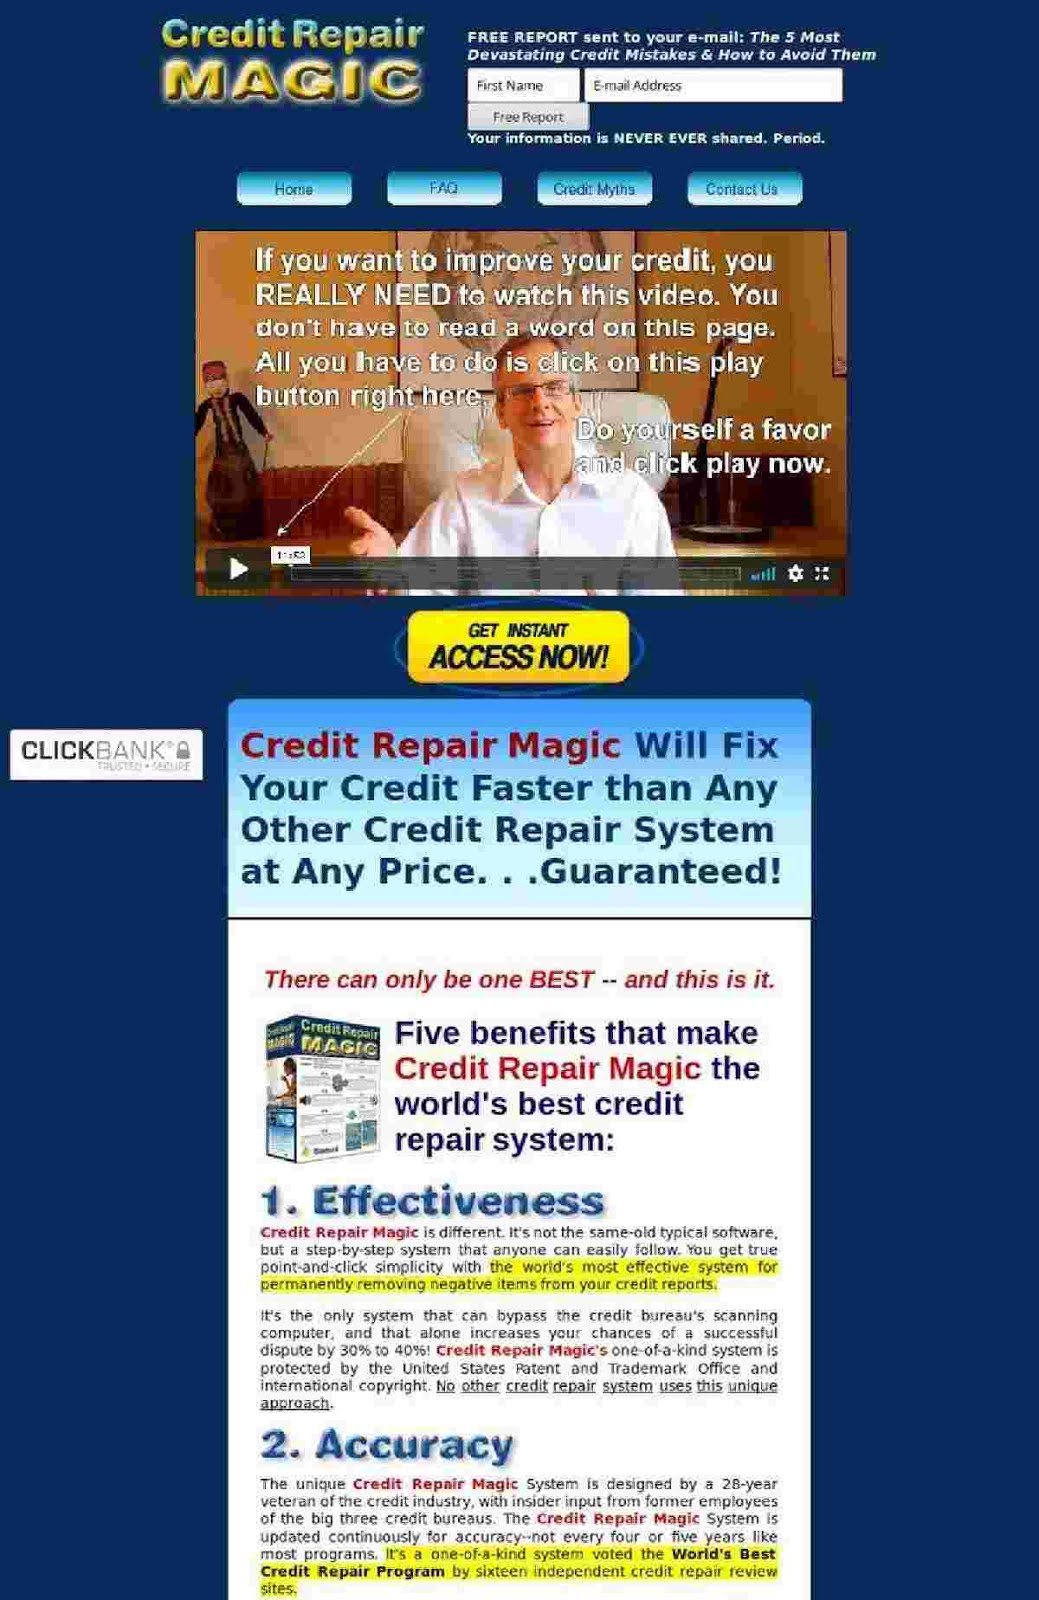 How to Increase Credit Score to 800 | Proven Methods to Improve Credit Score Fast